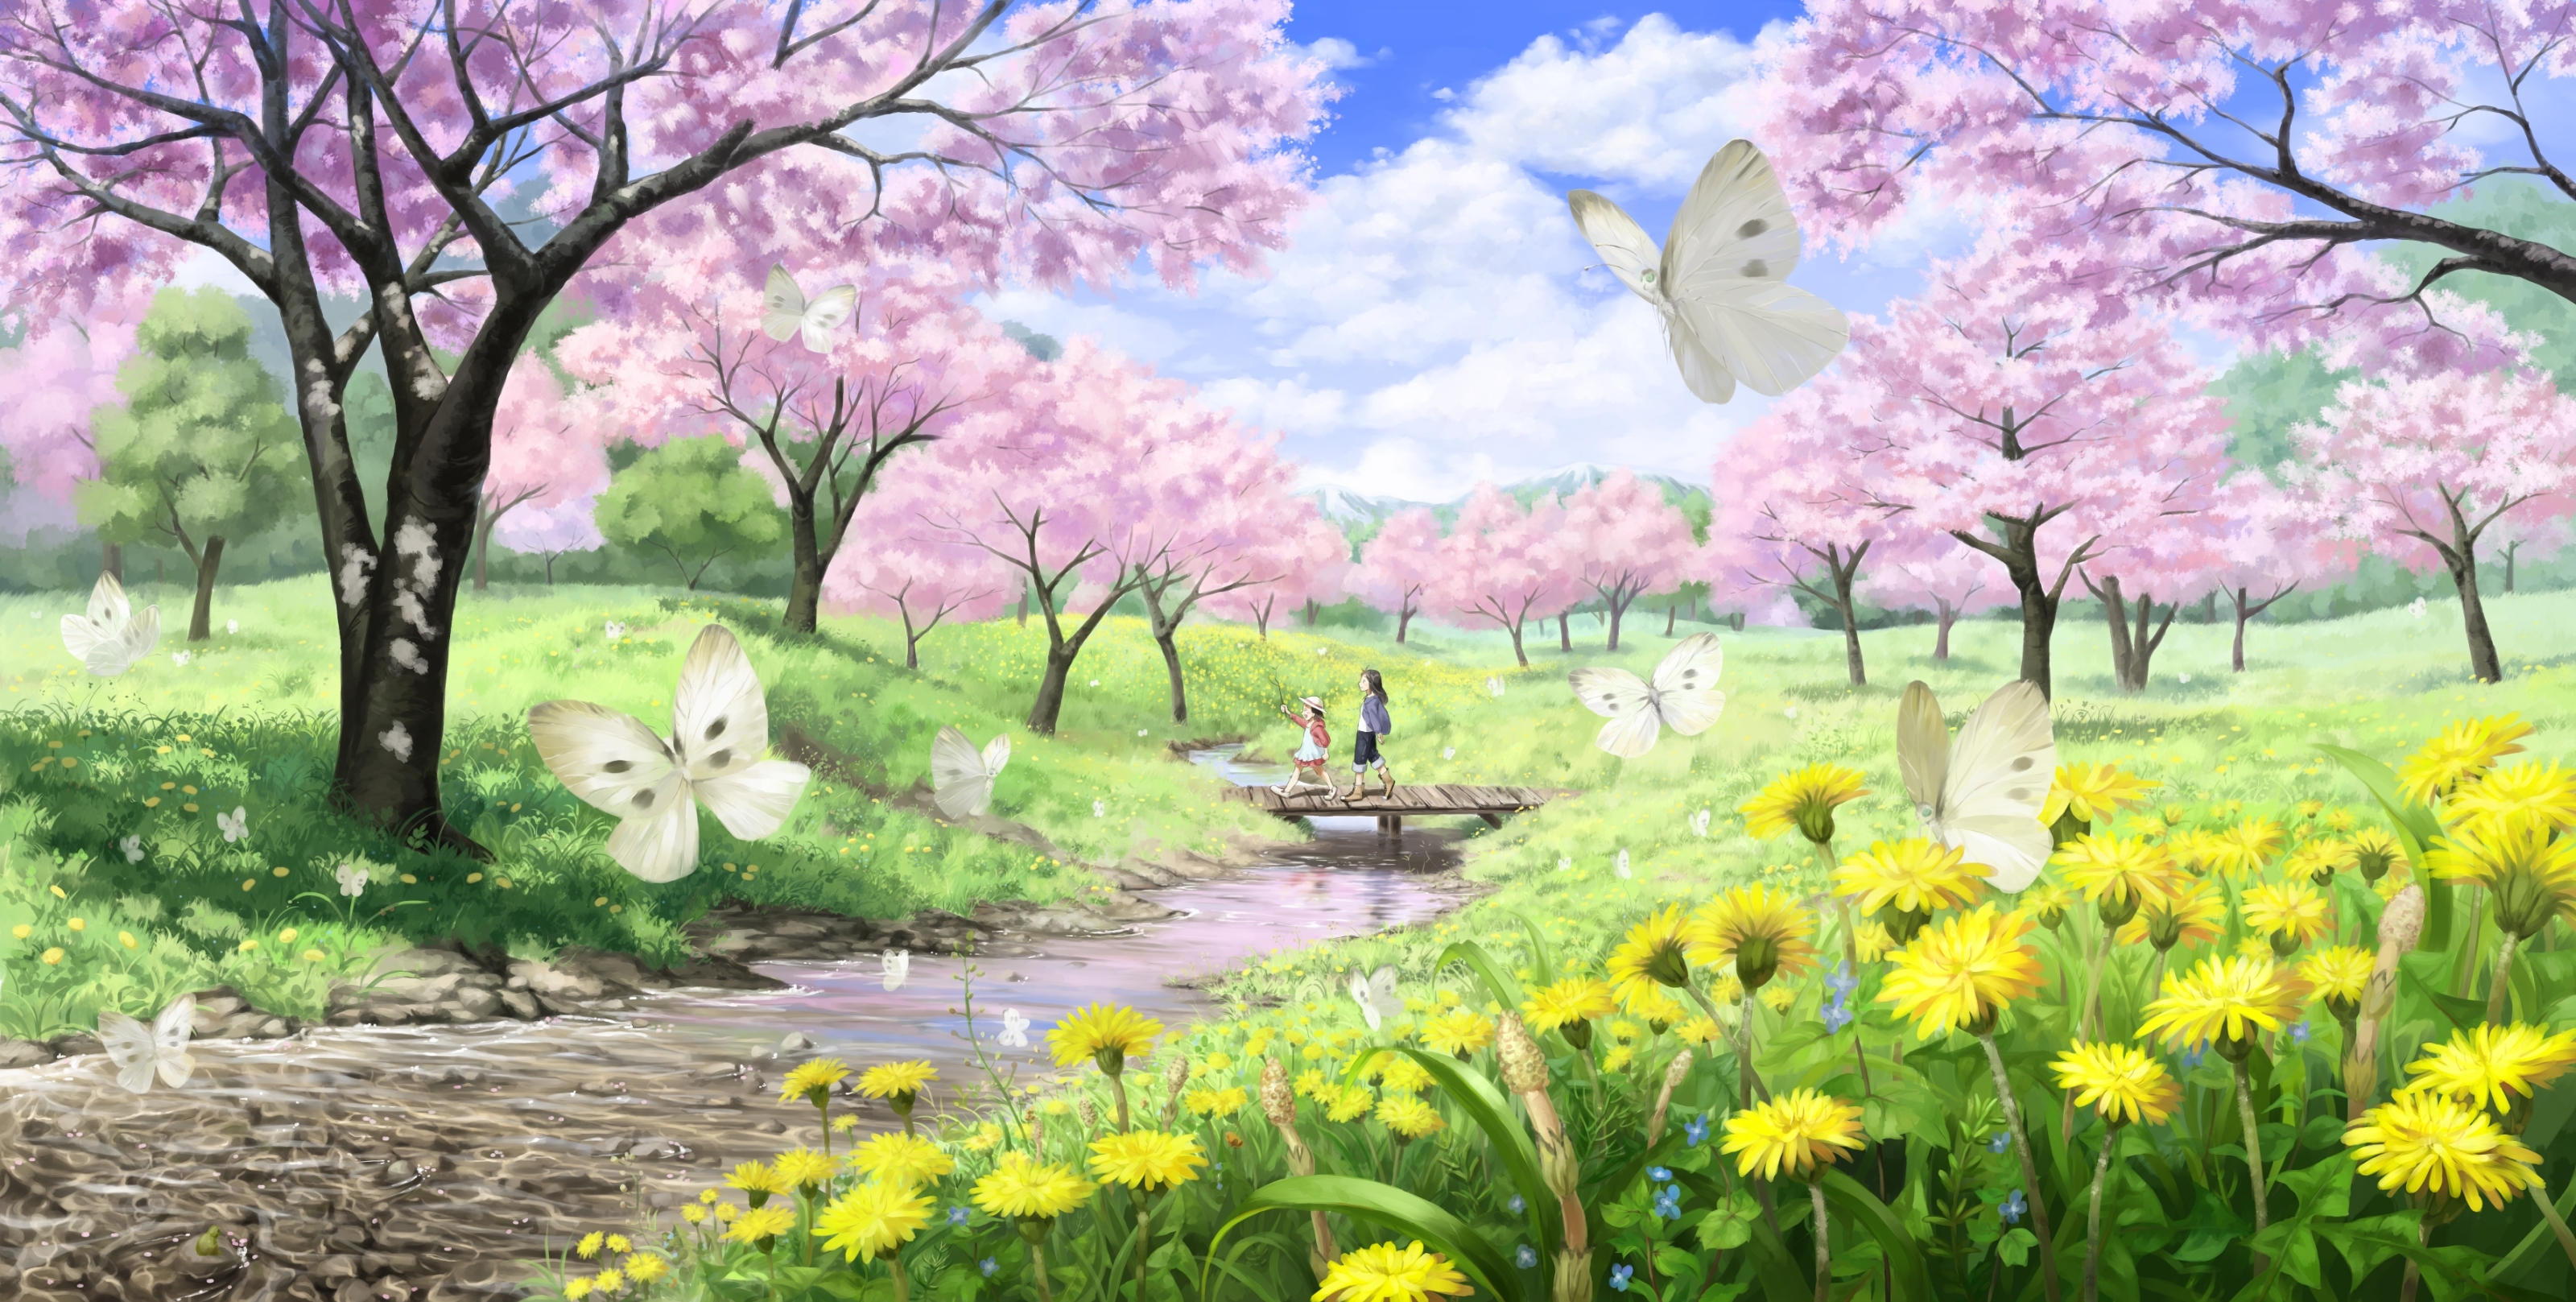 Gallery images and information Early Springtime Wallpaper